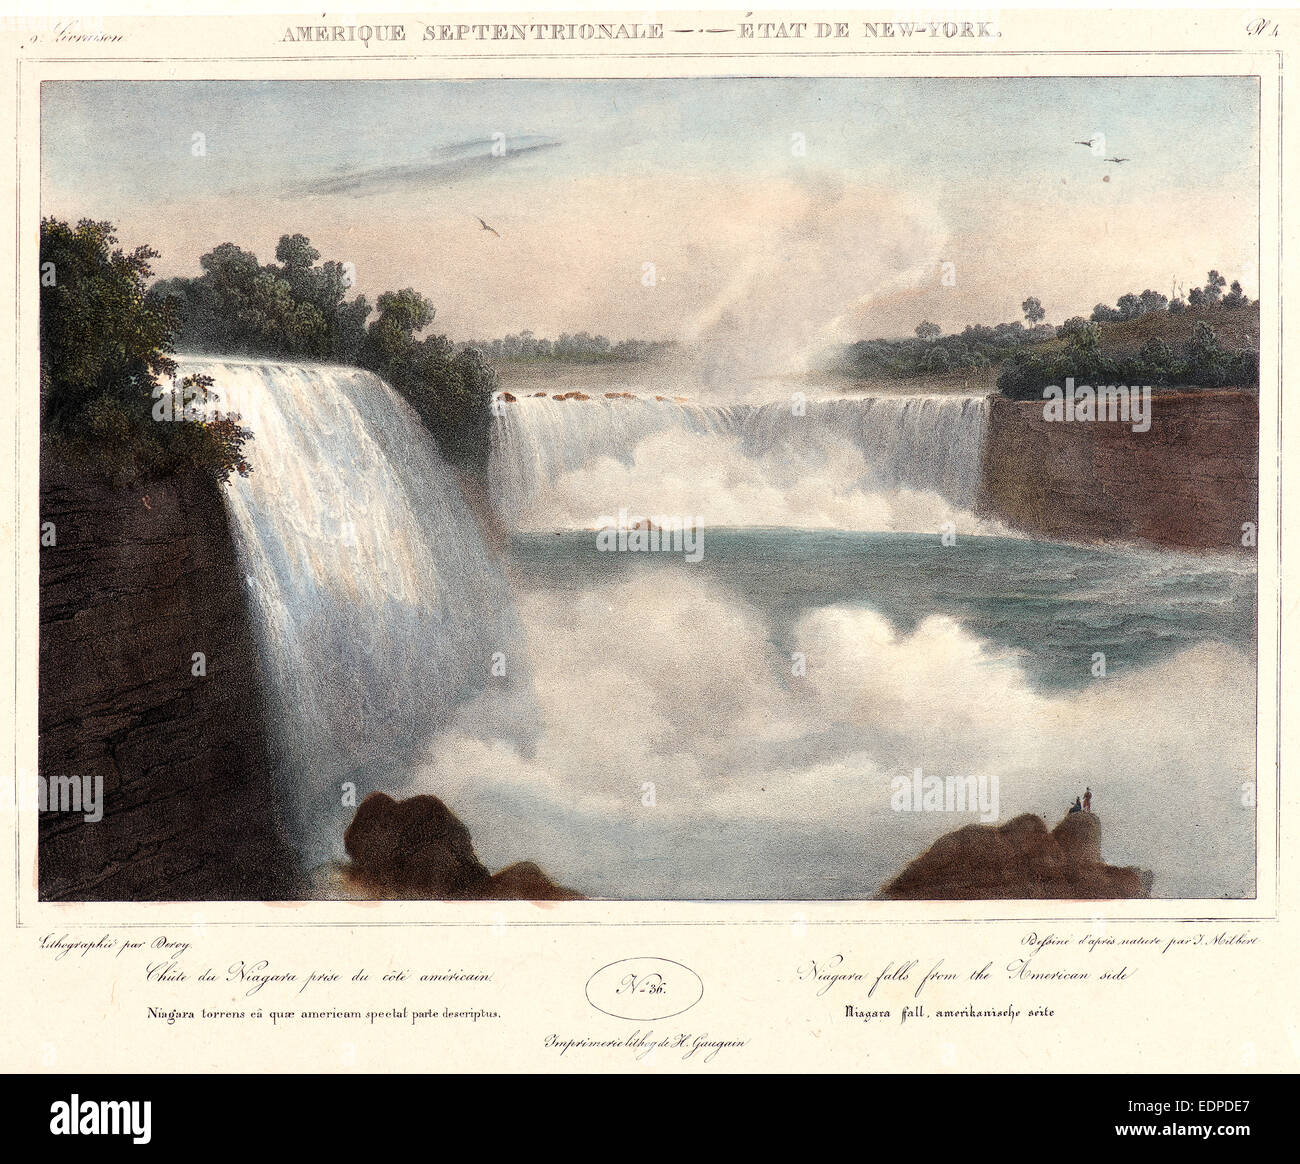 Isidore-Laurent Deroy (French, 1797 - 1886) after Jacques Gerard Milbert (French, 1766 - 1840). Niagara Falls Stock Photo